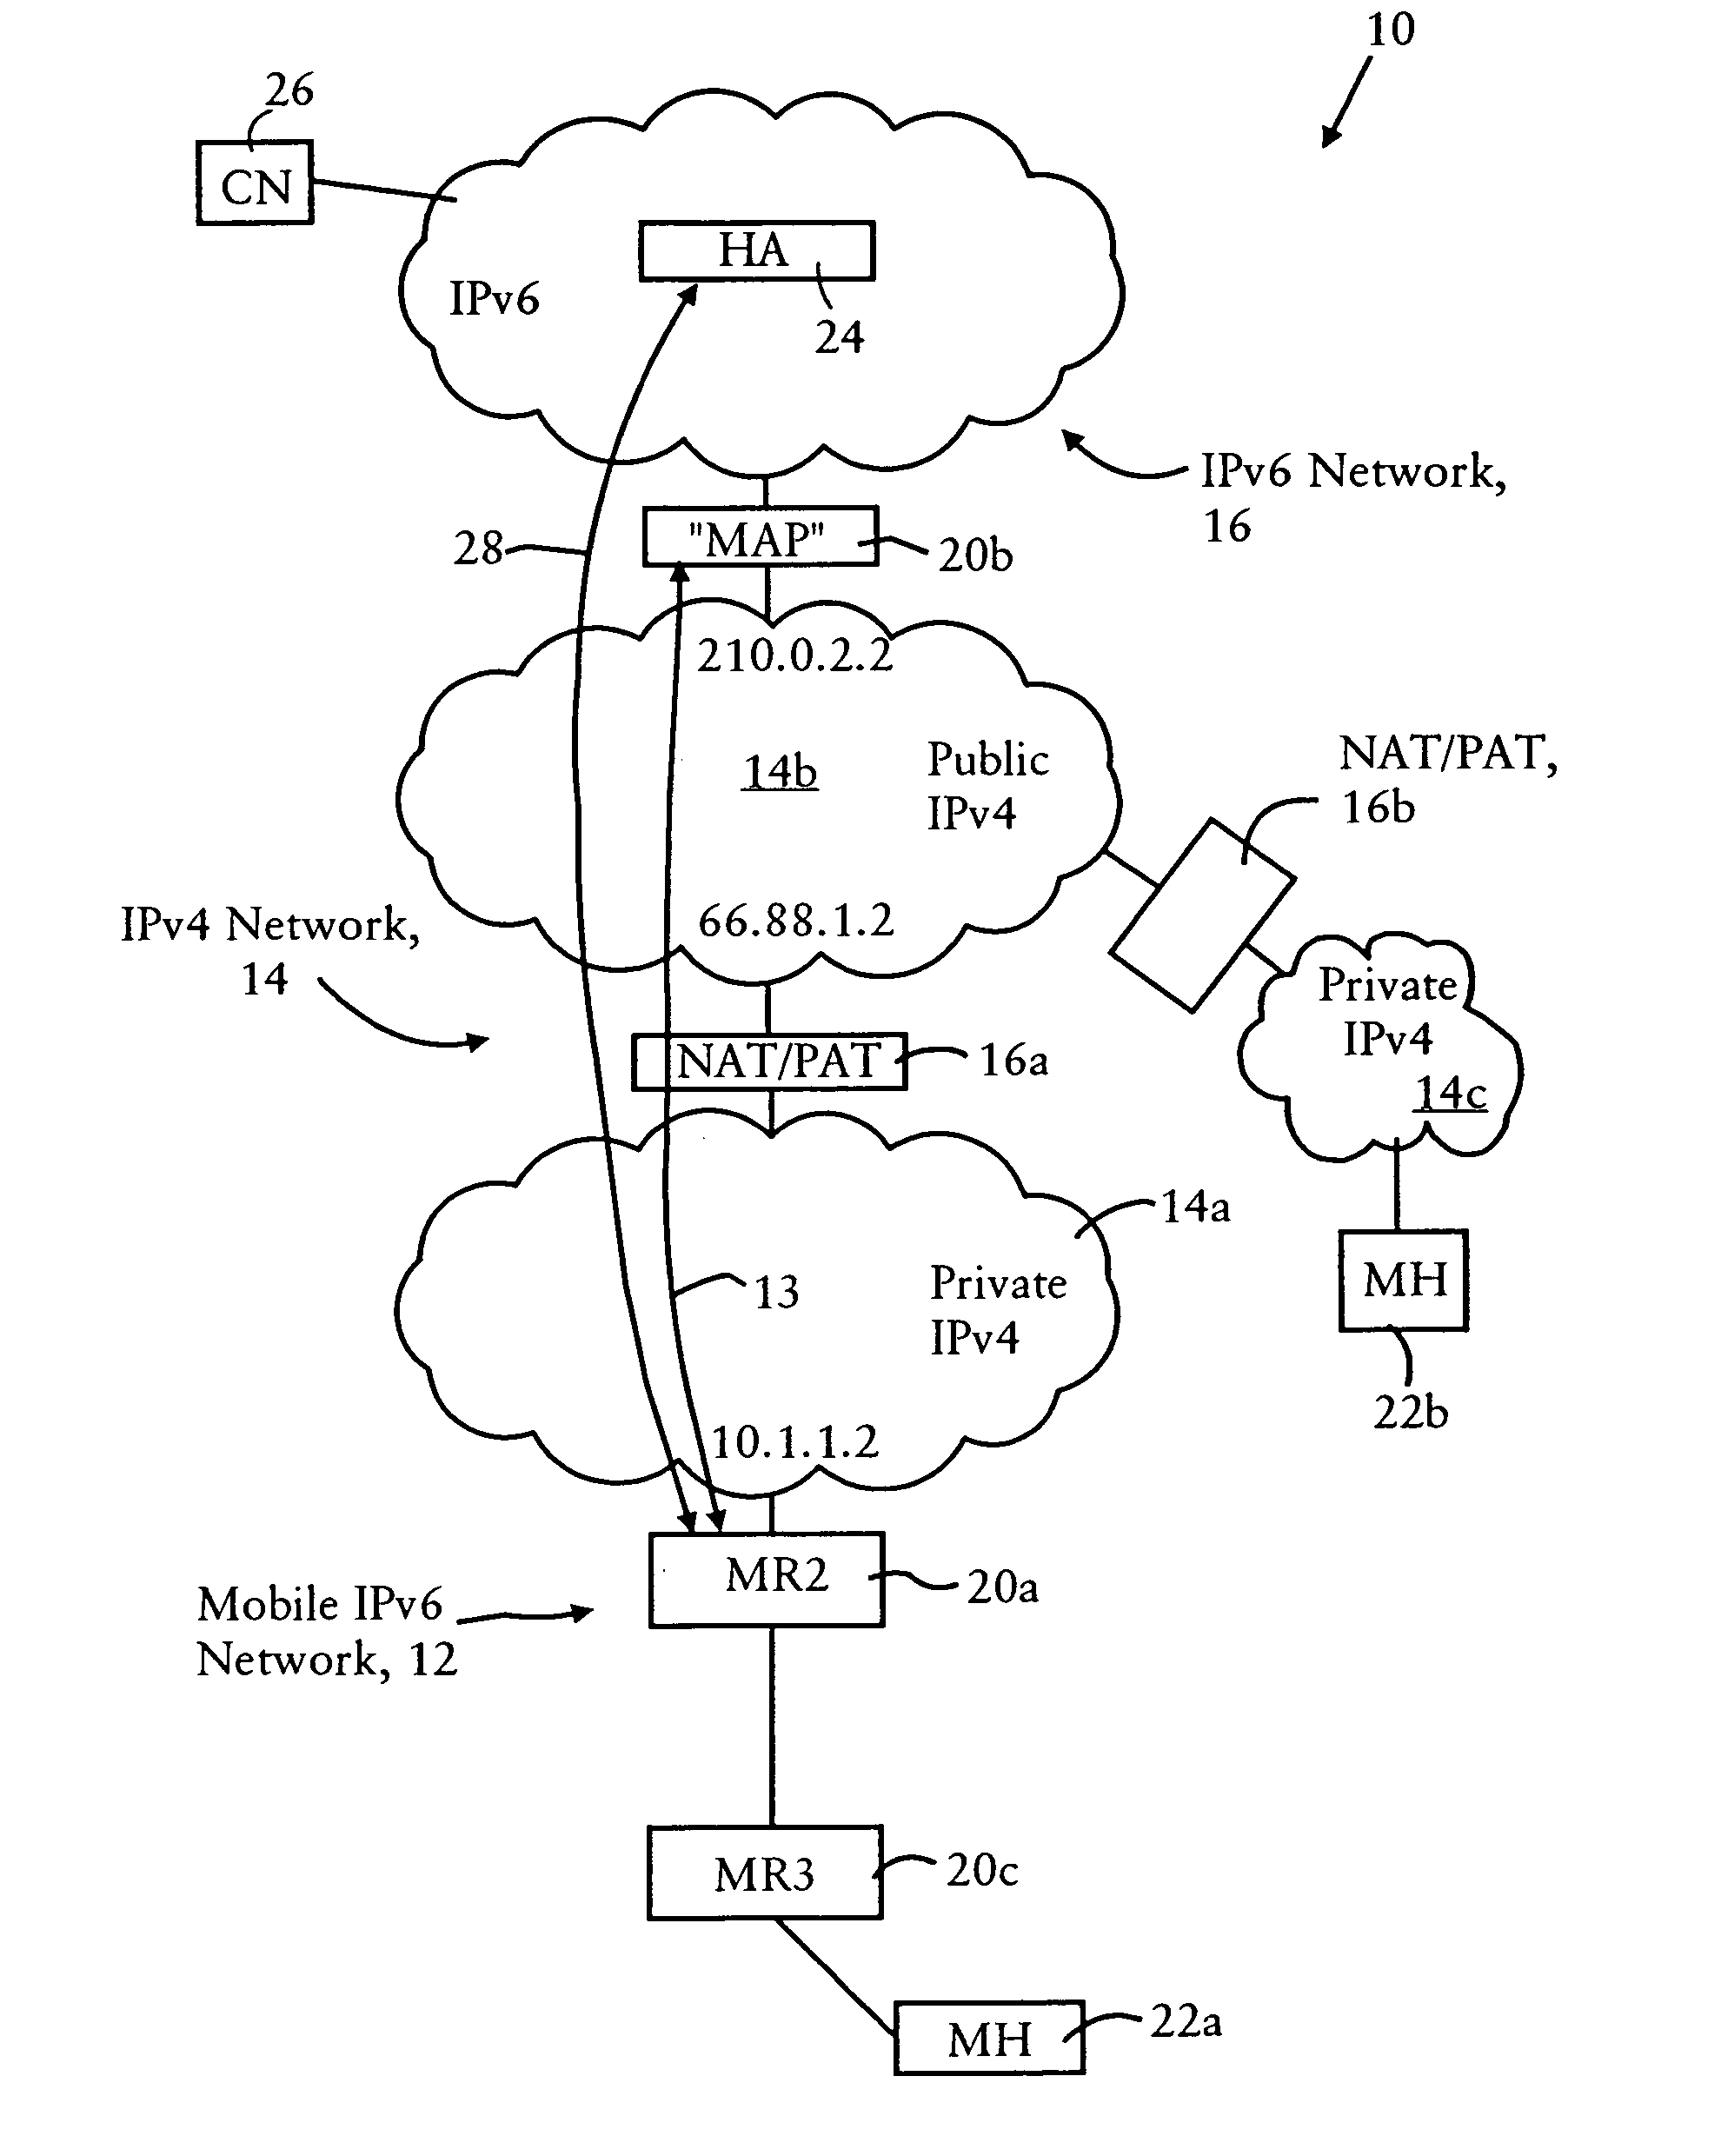 Arrangement for traversing an IPv4 network by IPv6 mobile nodes via a mobility anchor point